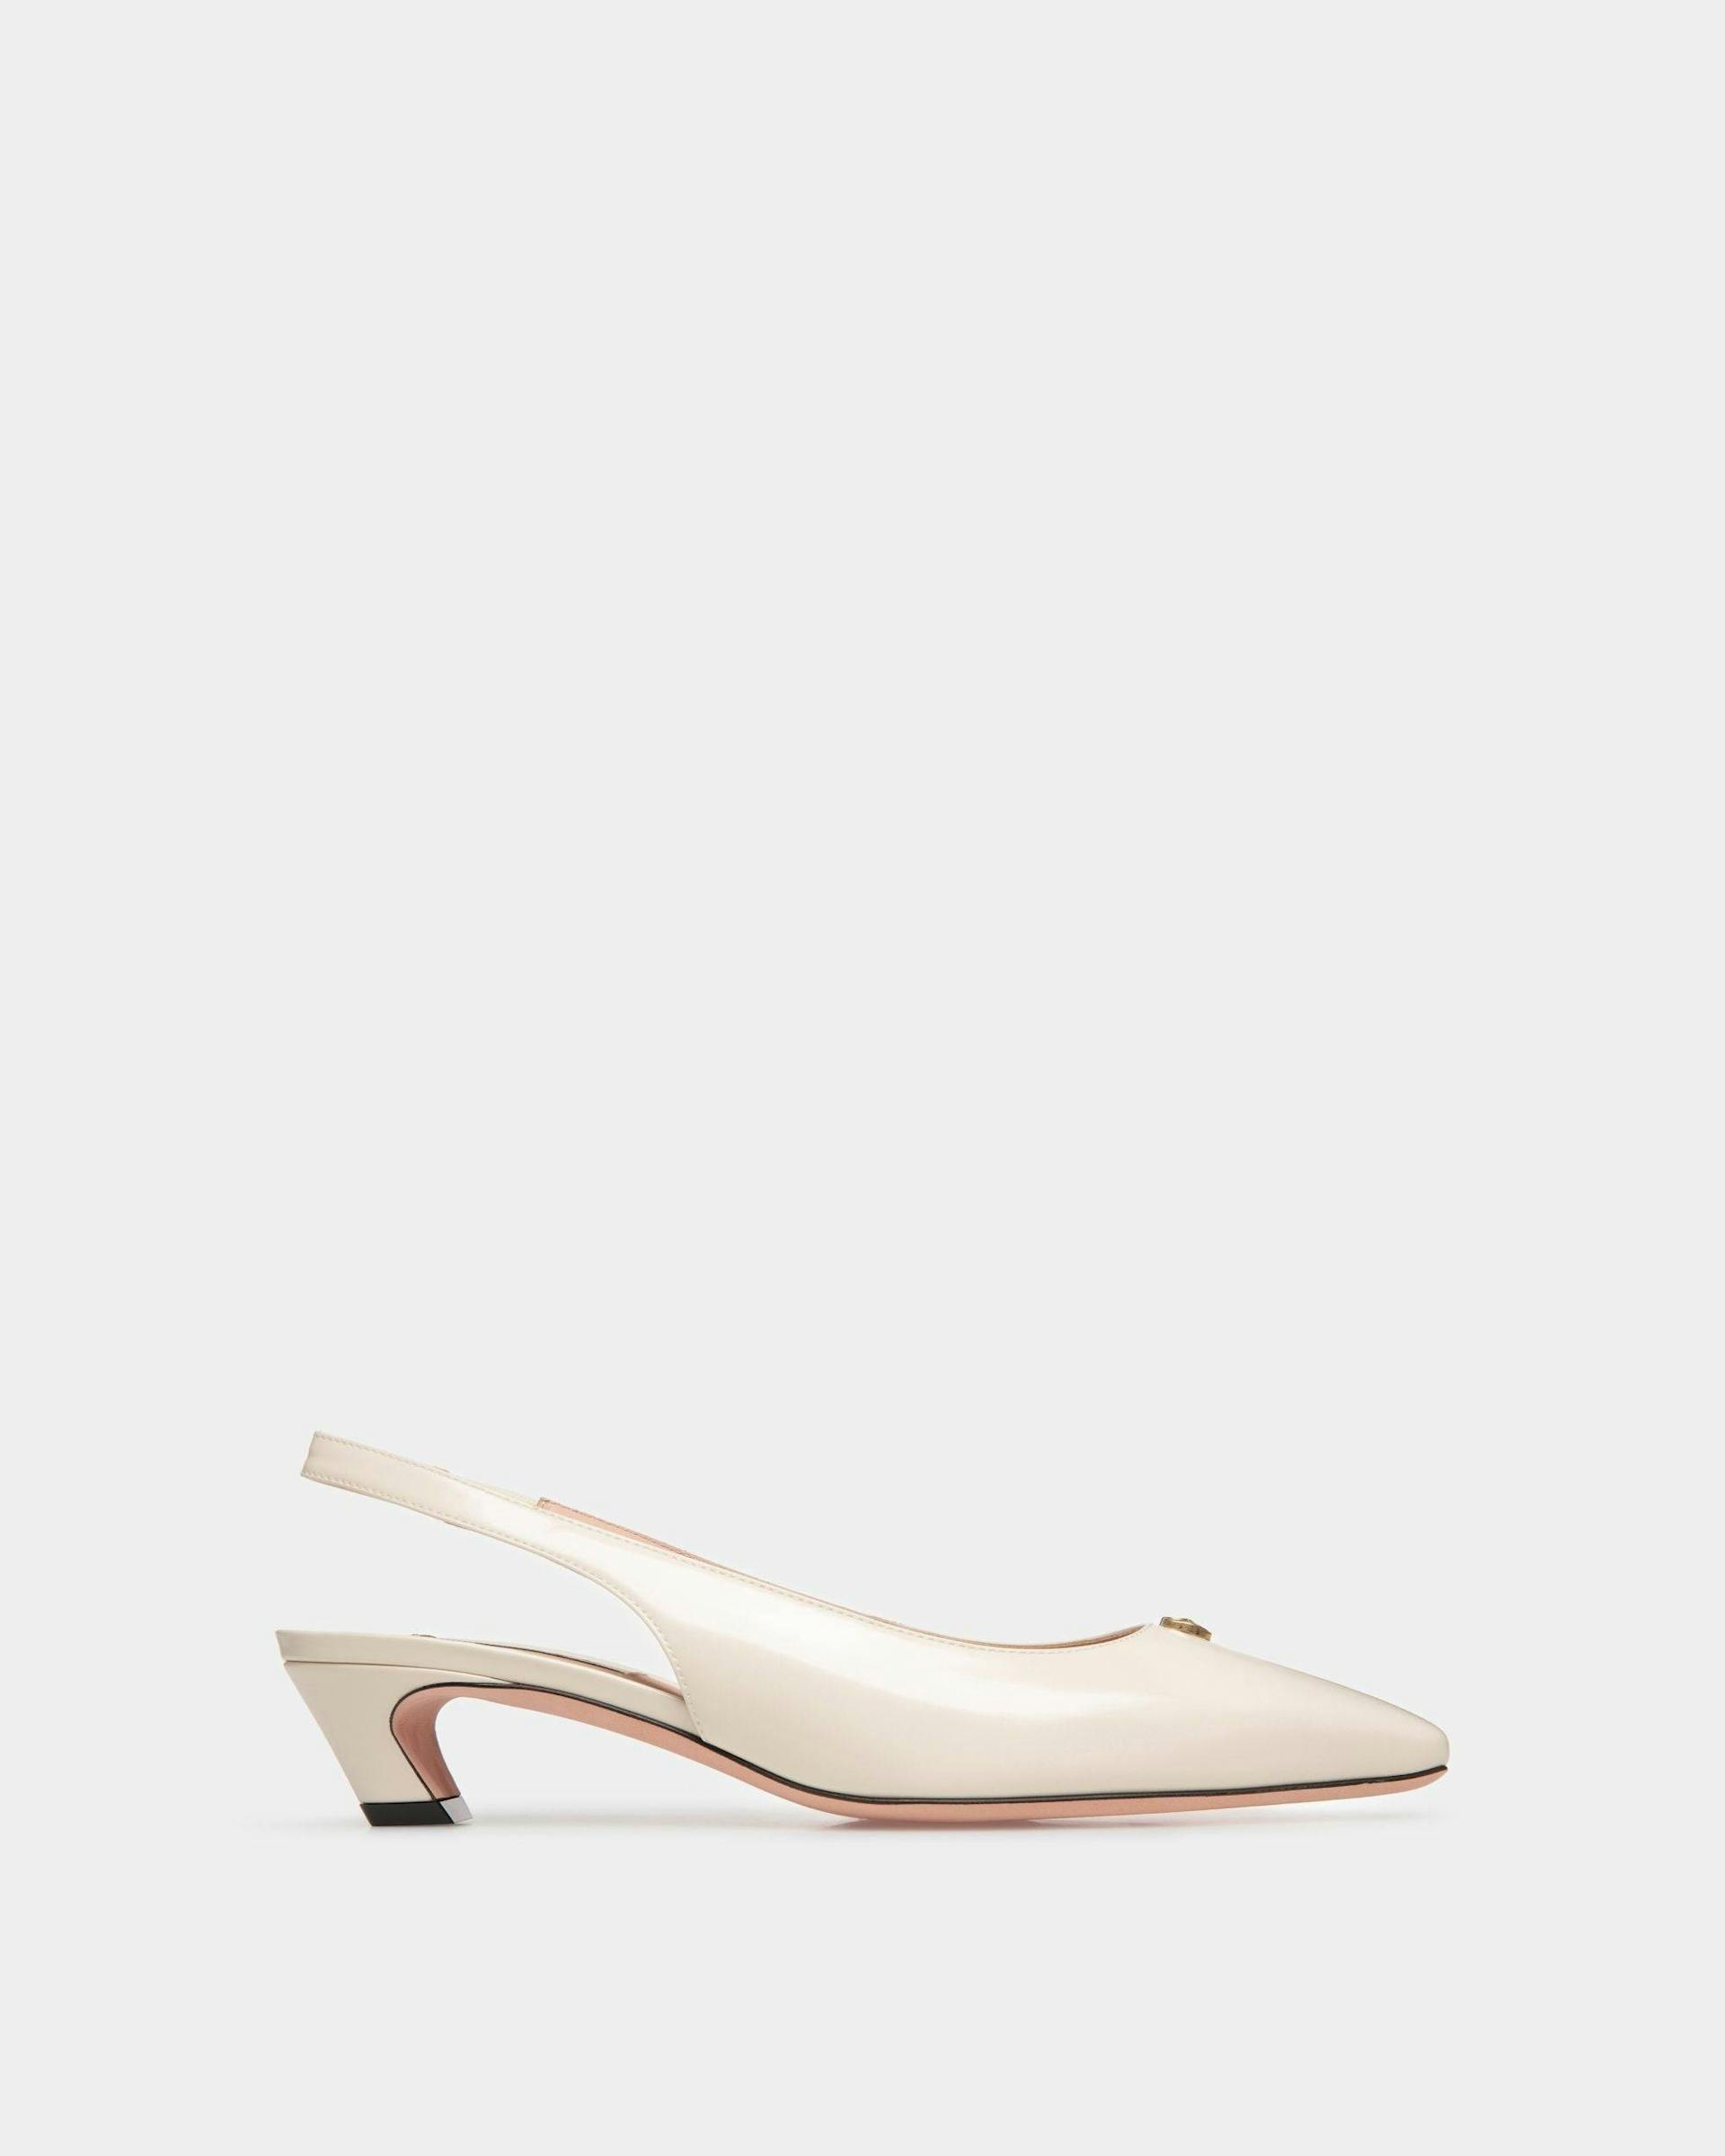 Sylt | Women's Slingback Pump in White Leather | Bally